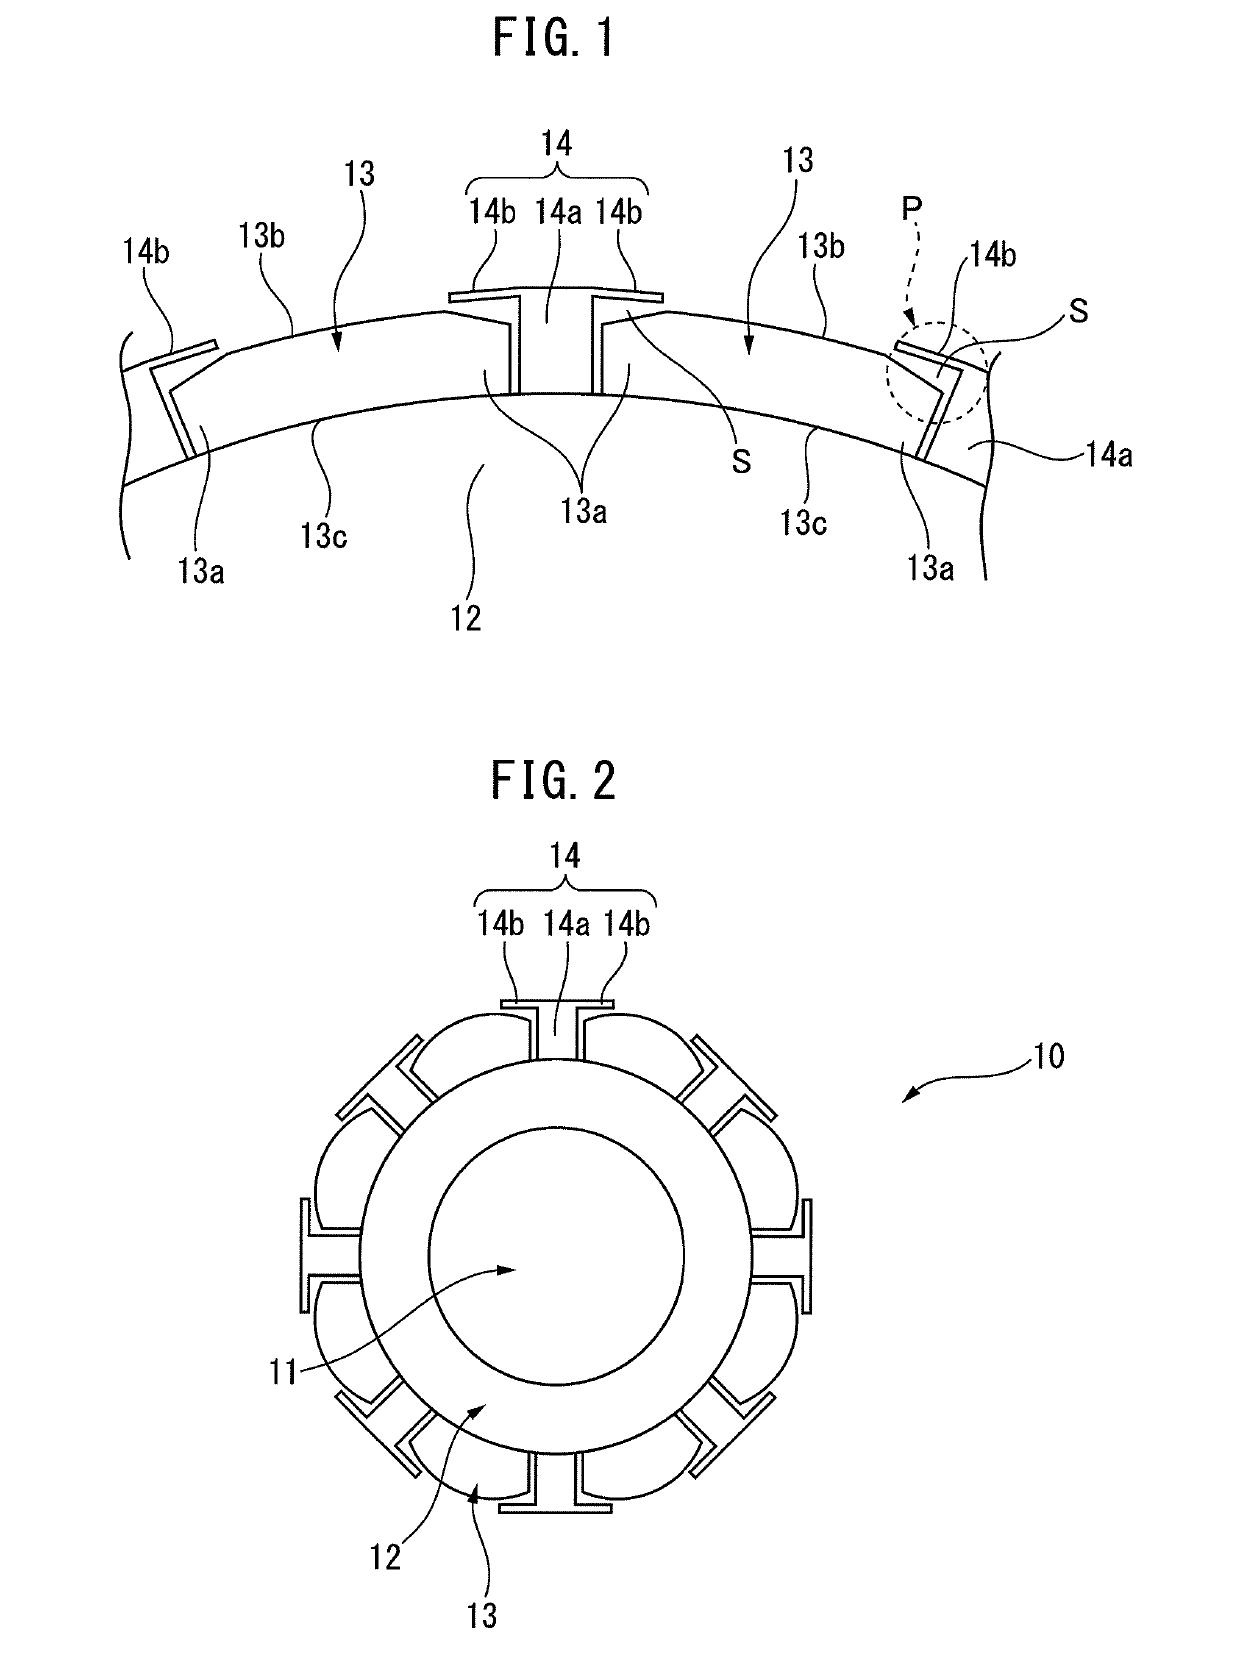 Permanent magnet rotor for synchronous electric motor